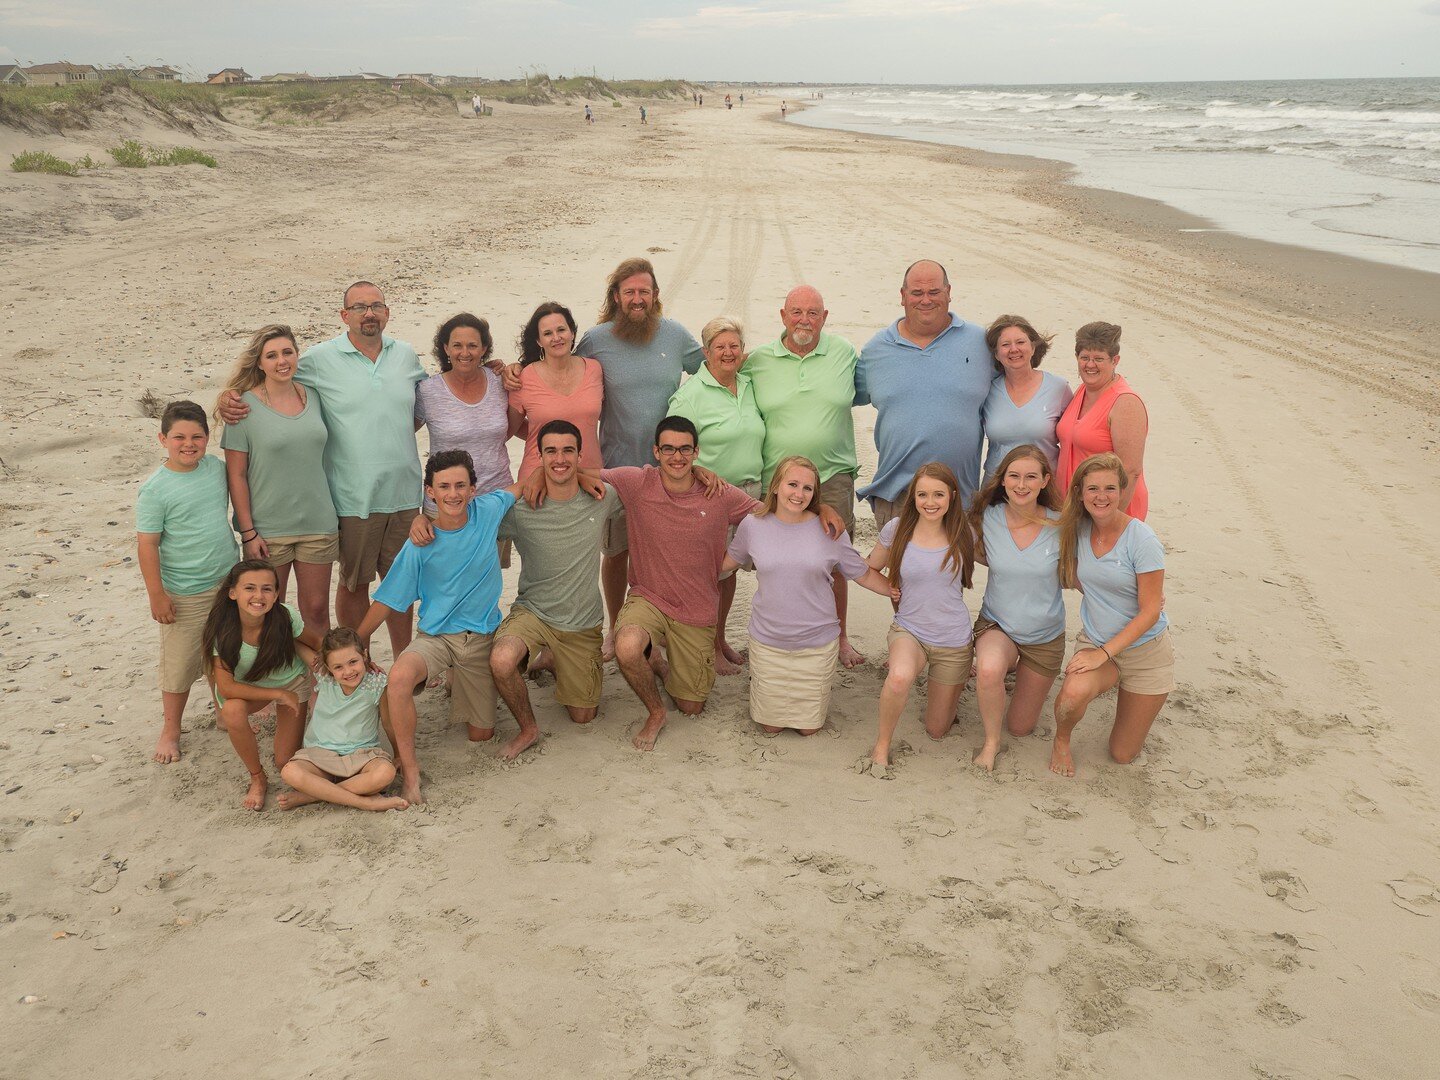 Family Beach Session on Holden Beach NC. Fun family, love the different color shirts. Holden Beach is a great beach for family portraits. 

#holdenbeach #holdenbeachportraits #familybeachportraits #beachlife #beachphotography #beachportraits #familyv